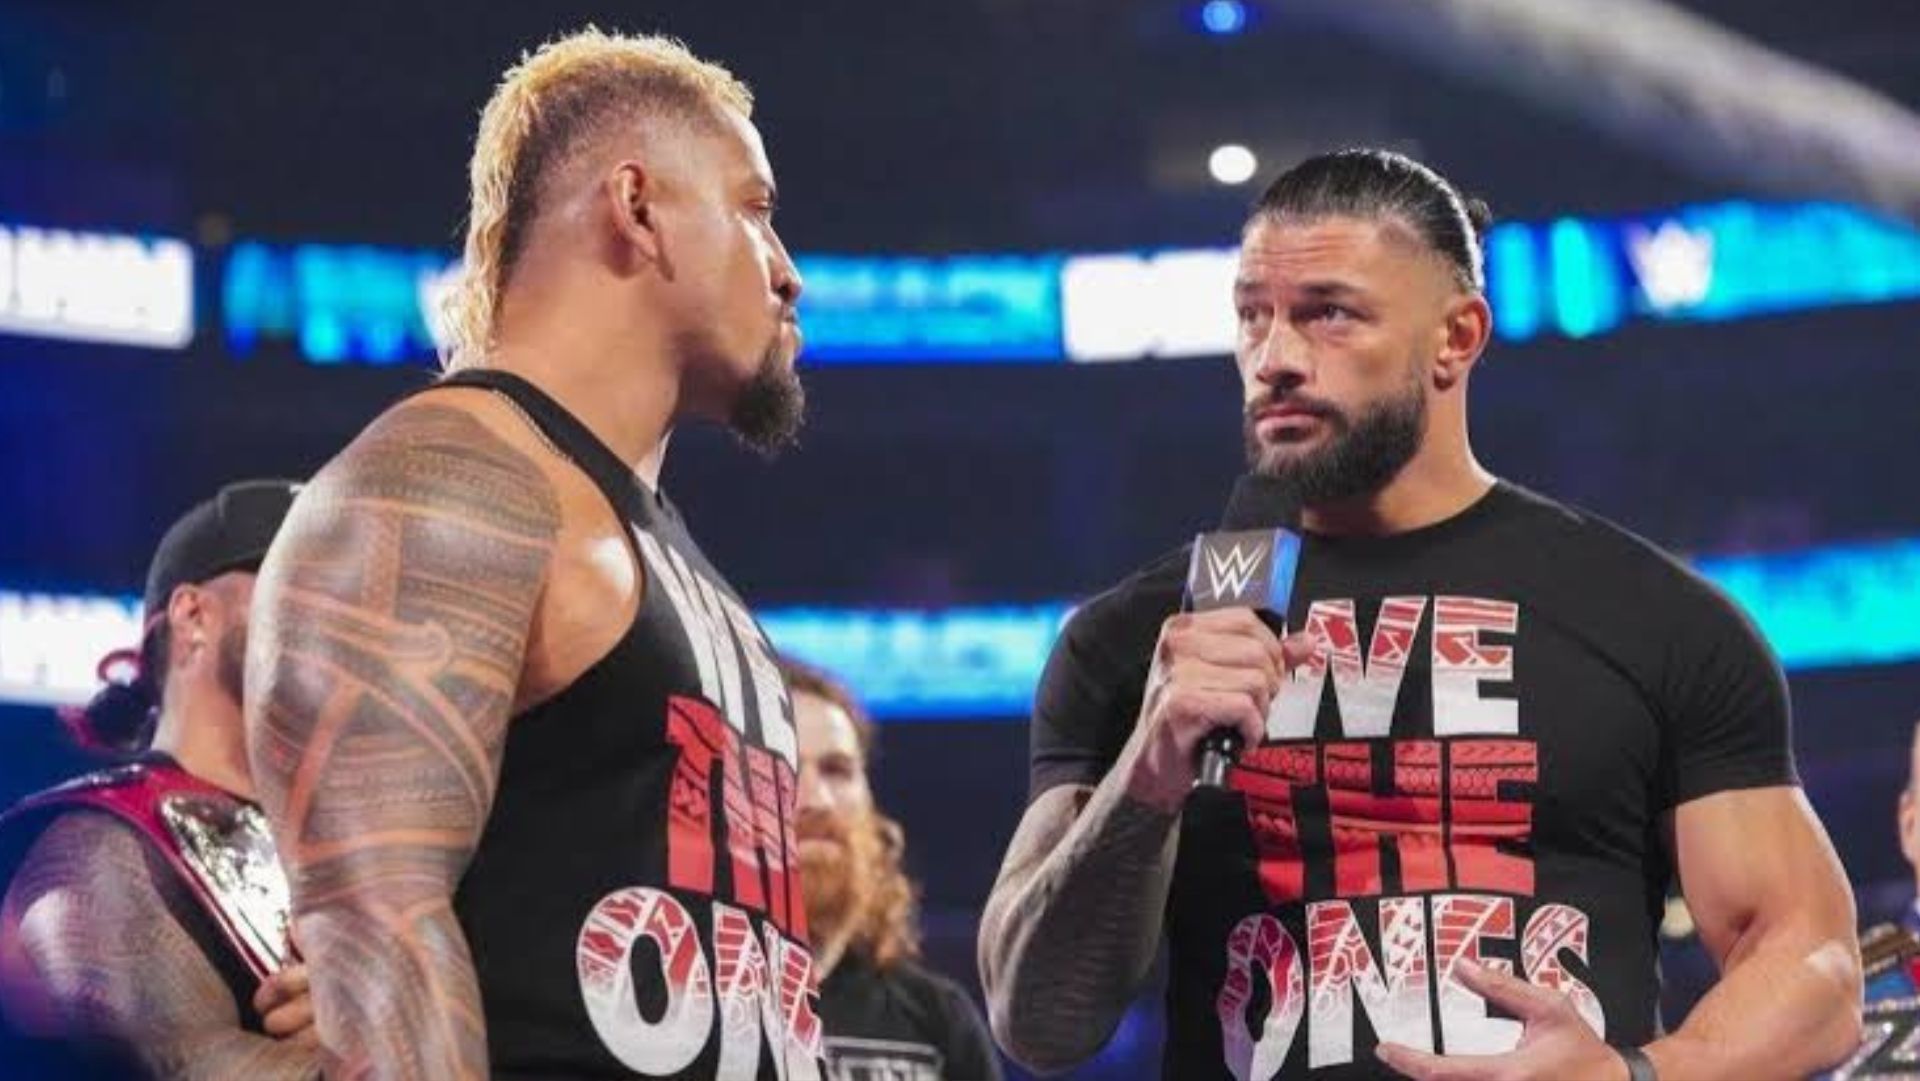 Solo Sikoa and Roman Reigns have teamed up for tag team matches.